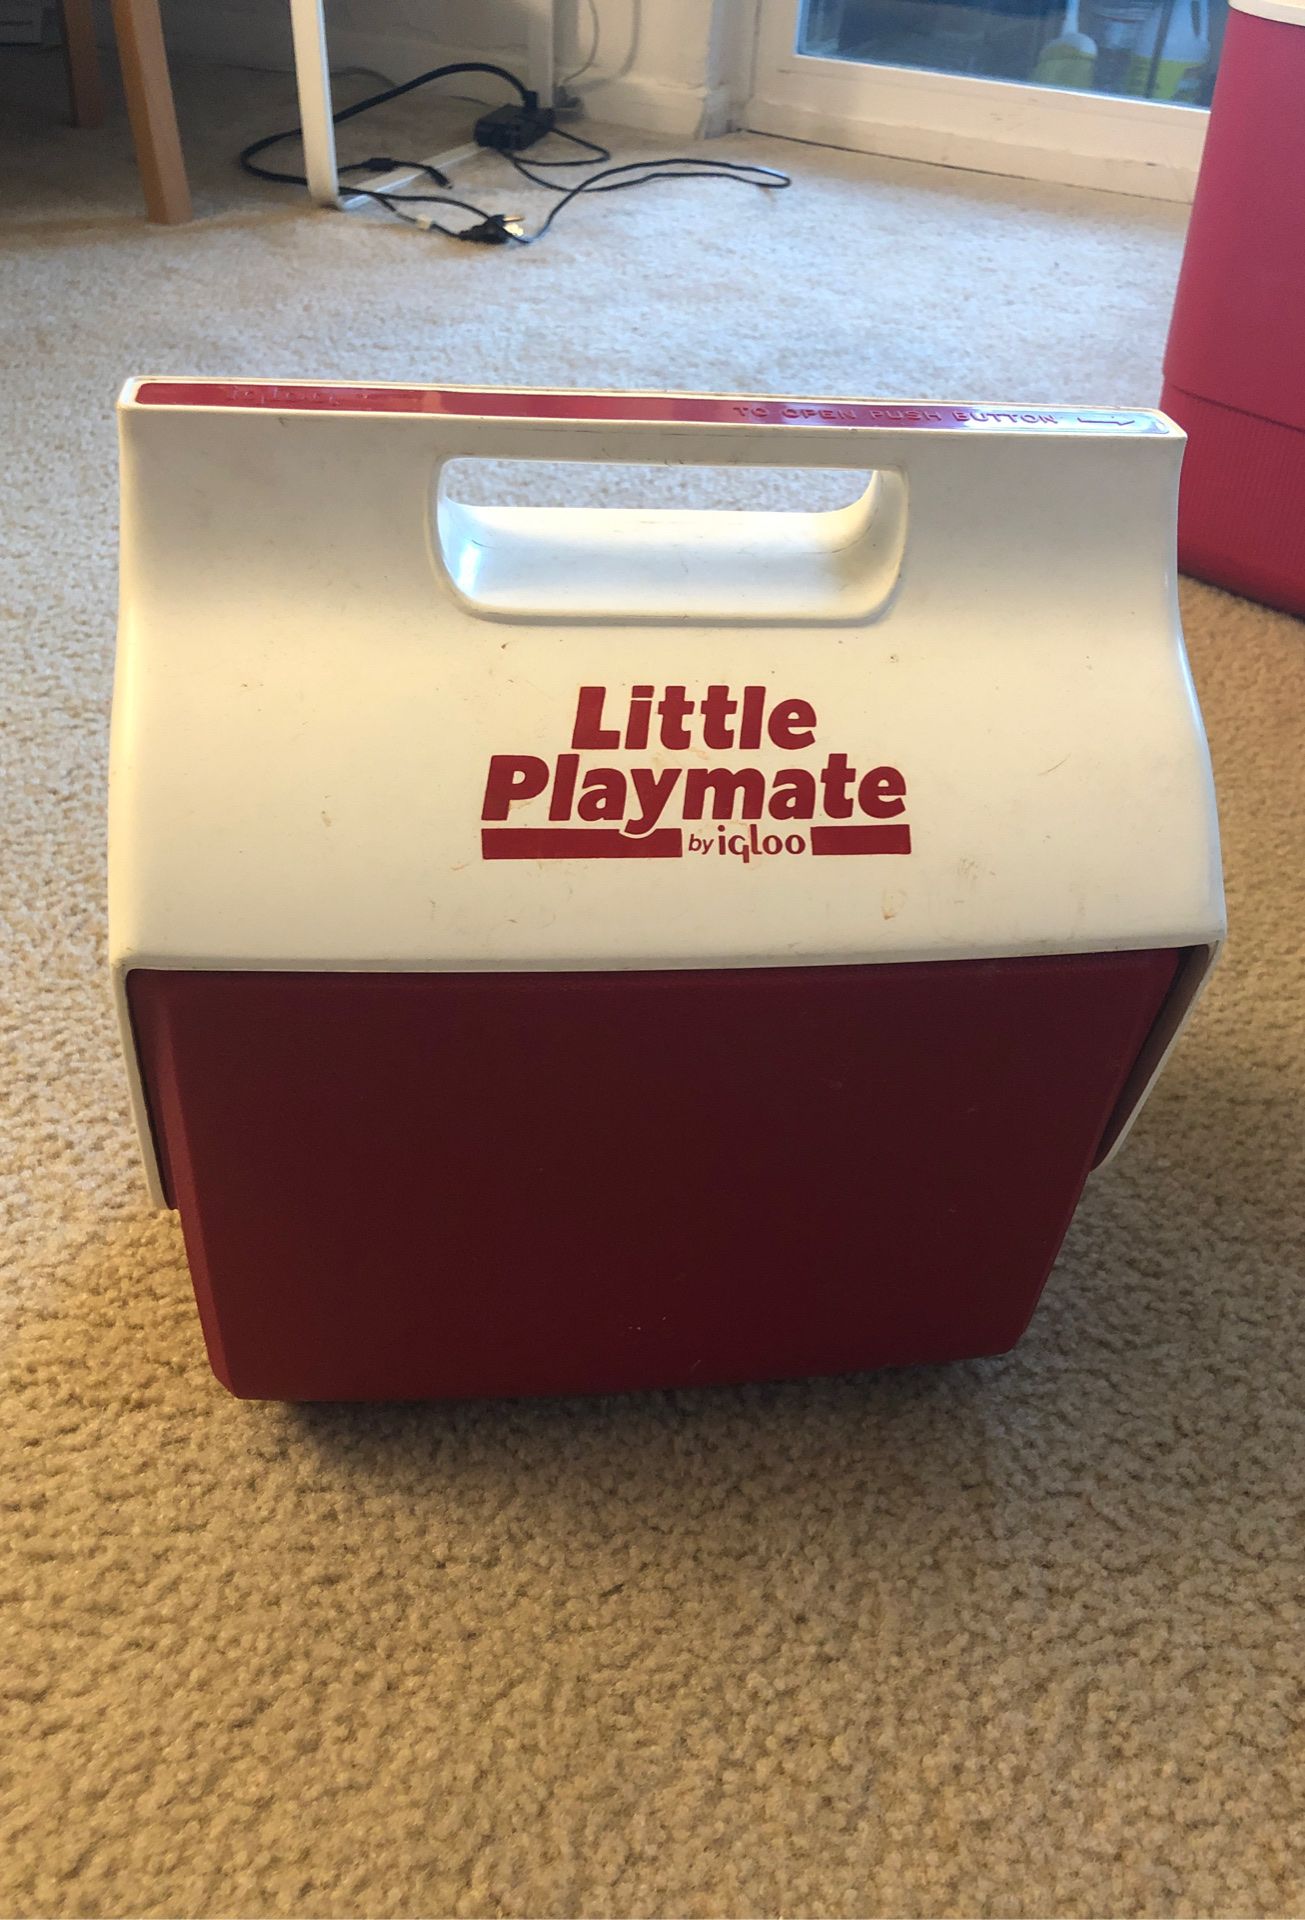 Little playmate cooler by igloo